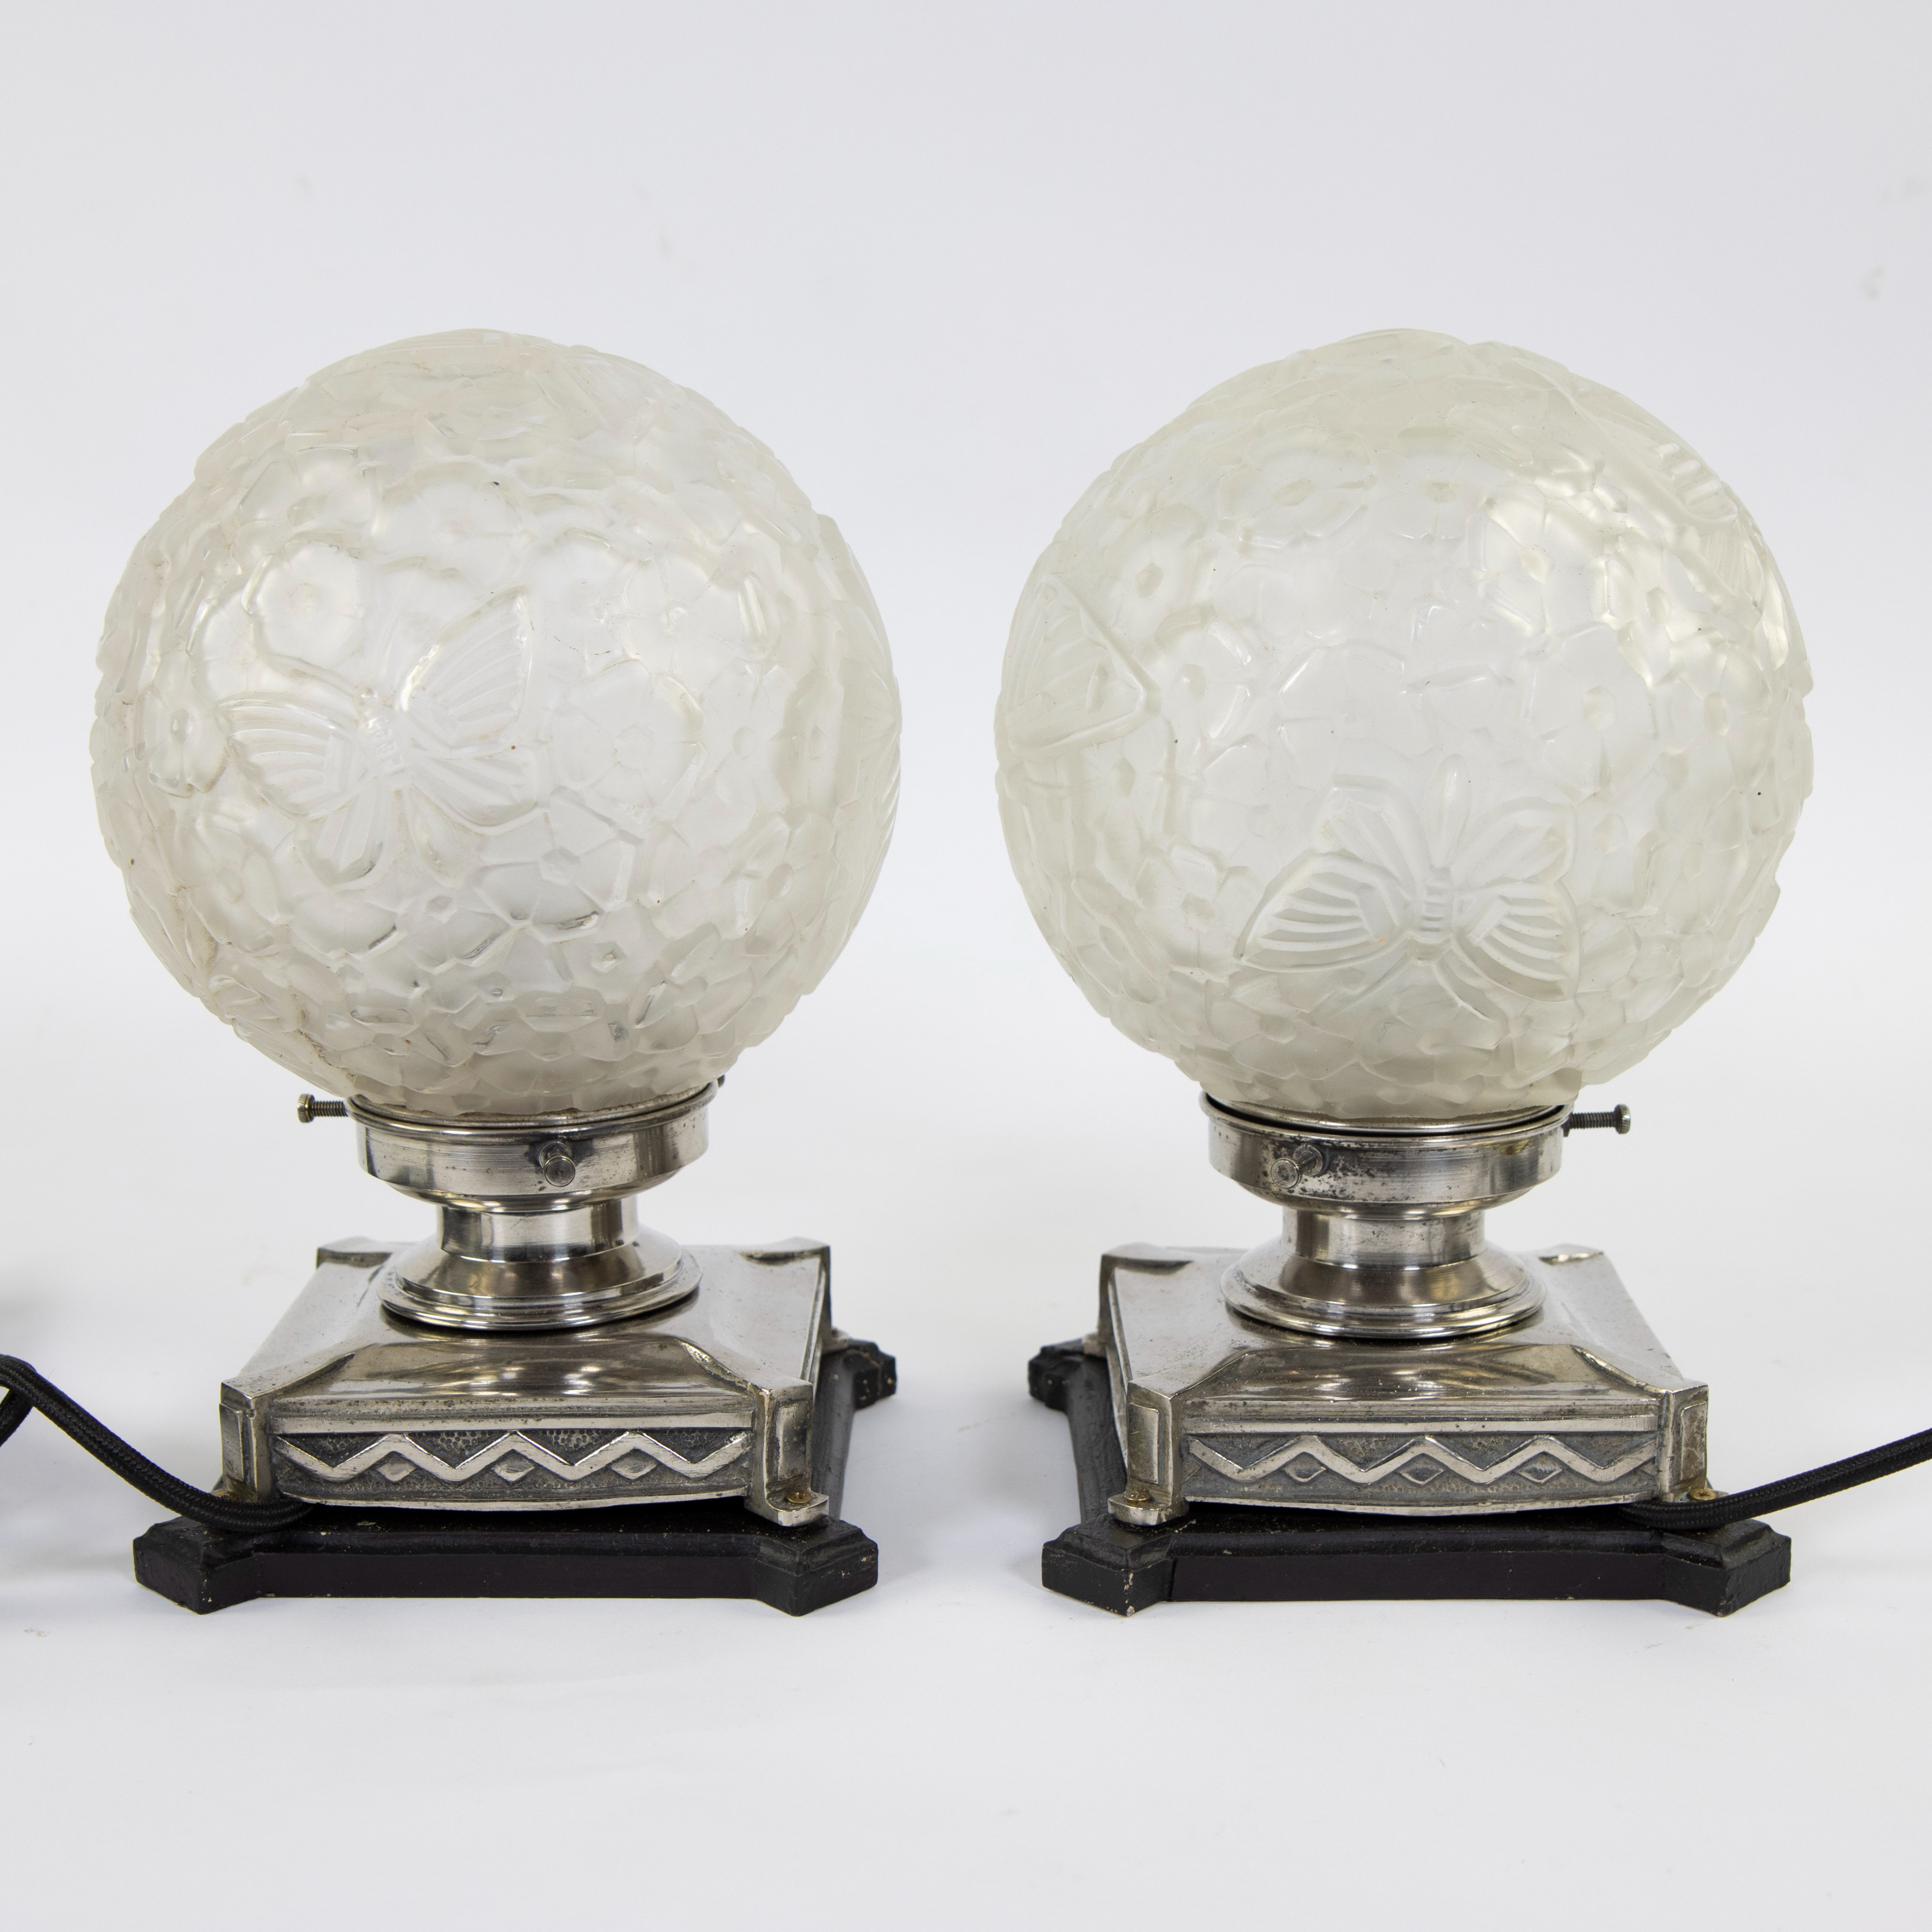 Pair of Art Deco table lamps in silver plated brass and glass balls with butterfly motif - Image 3 of 4